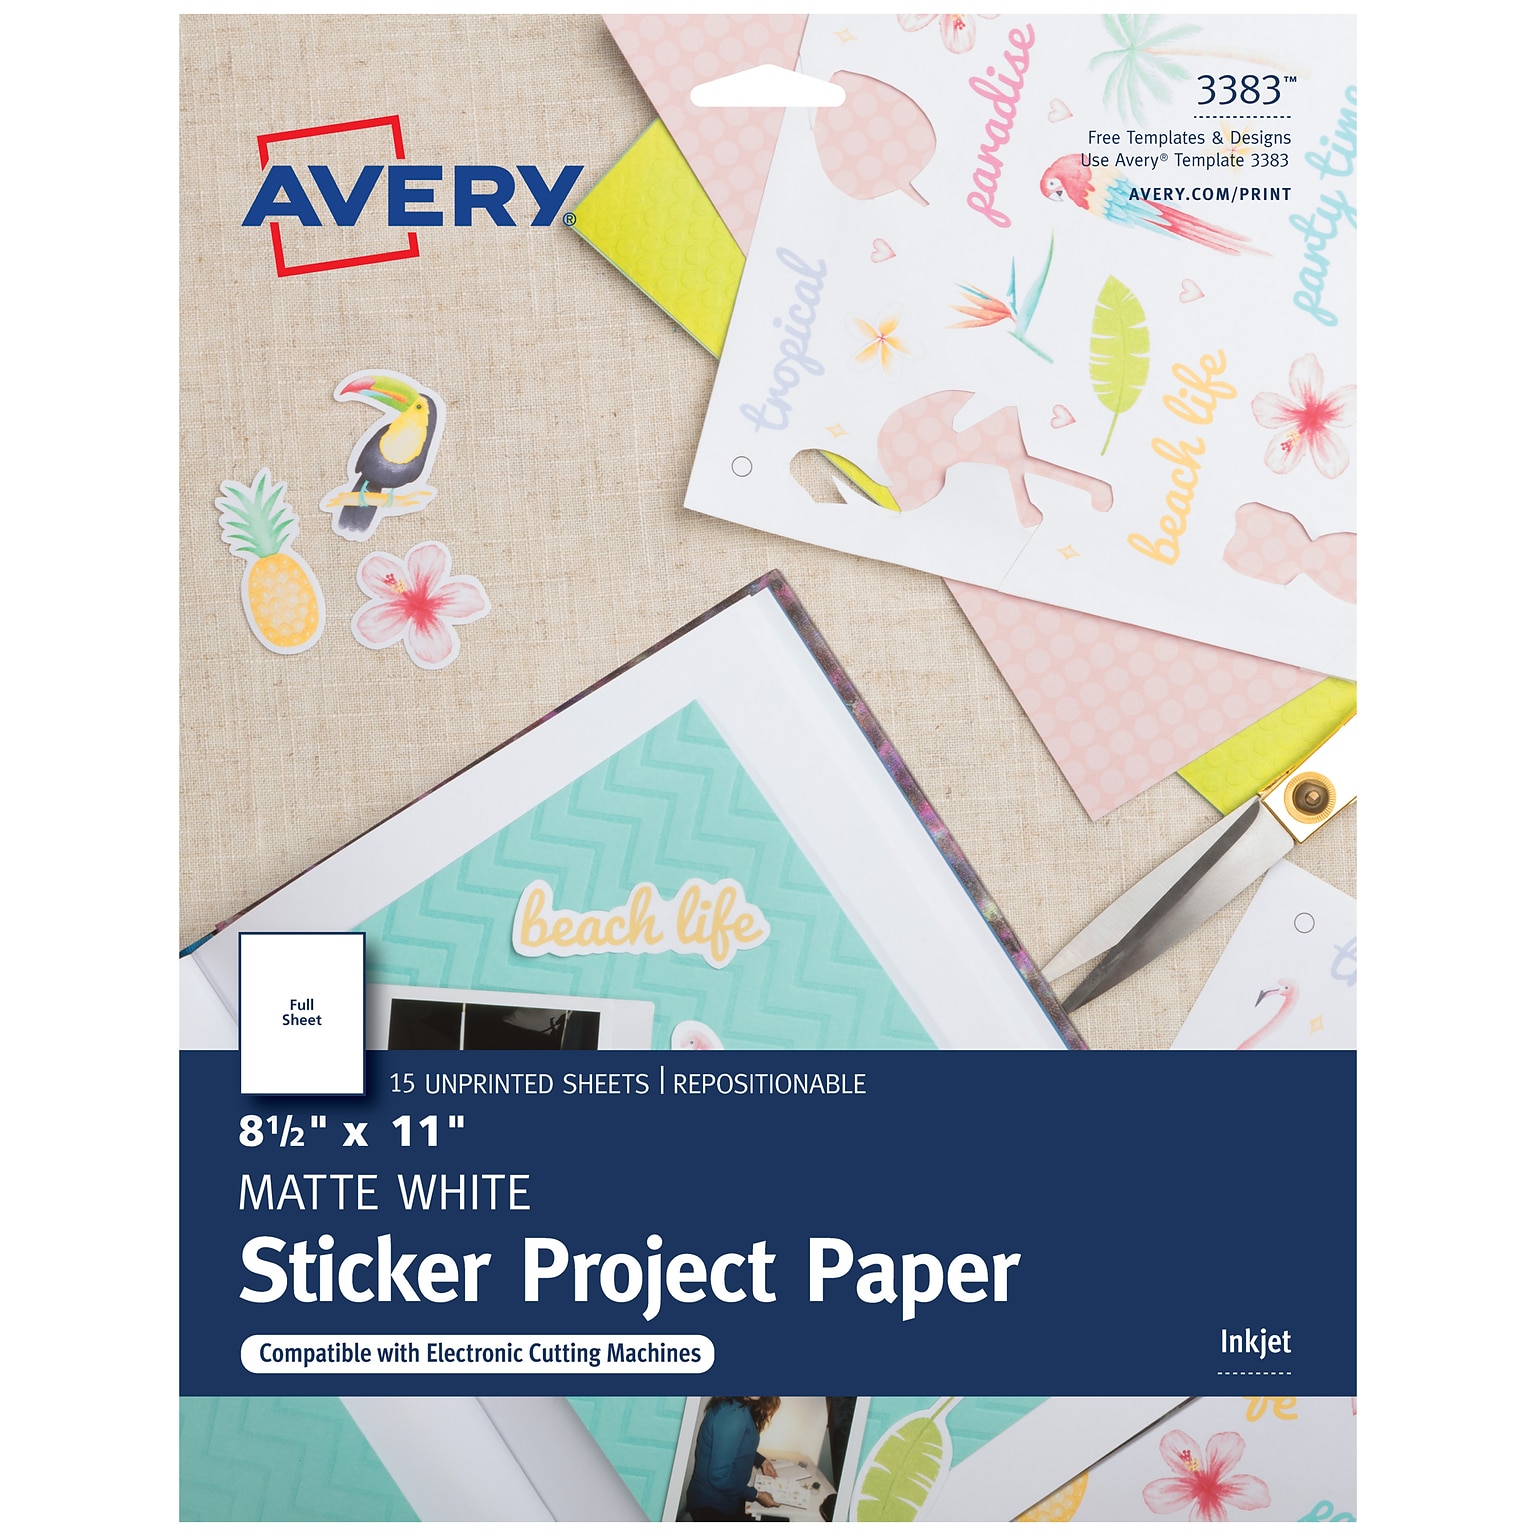 Avery Repositionable Inkjet Sticker Paper, 8.5 x 11, White, 1 Label/Sheet, 15 Sheets/Pack, 15 Stickers/Pack (3383)